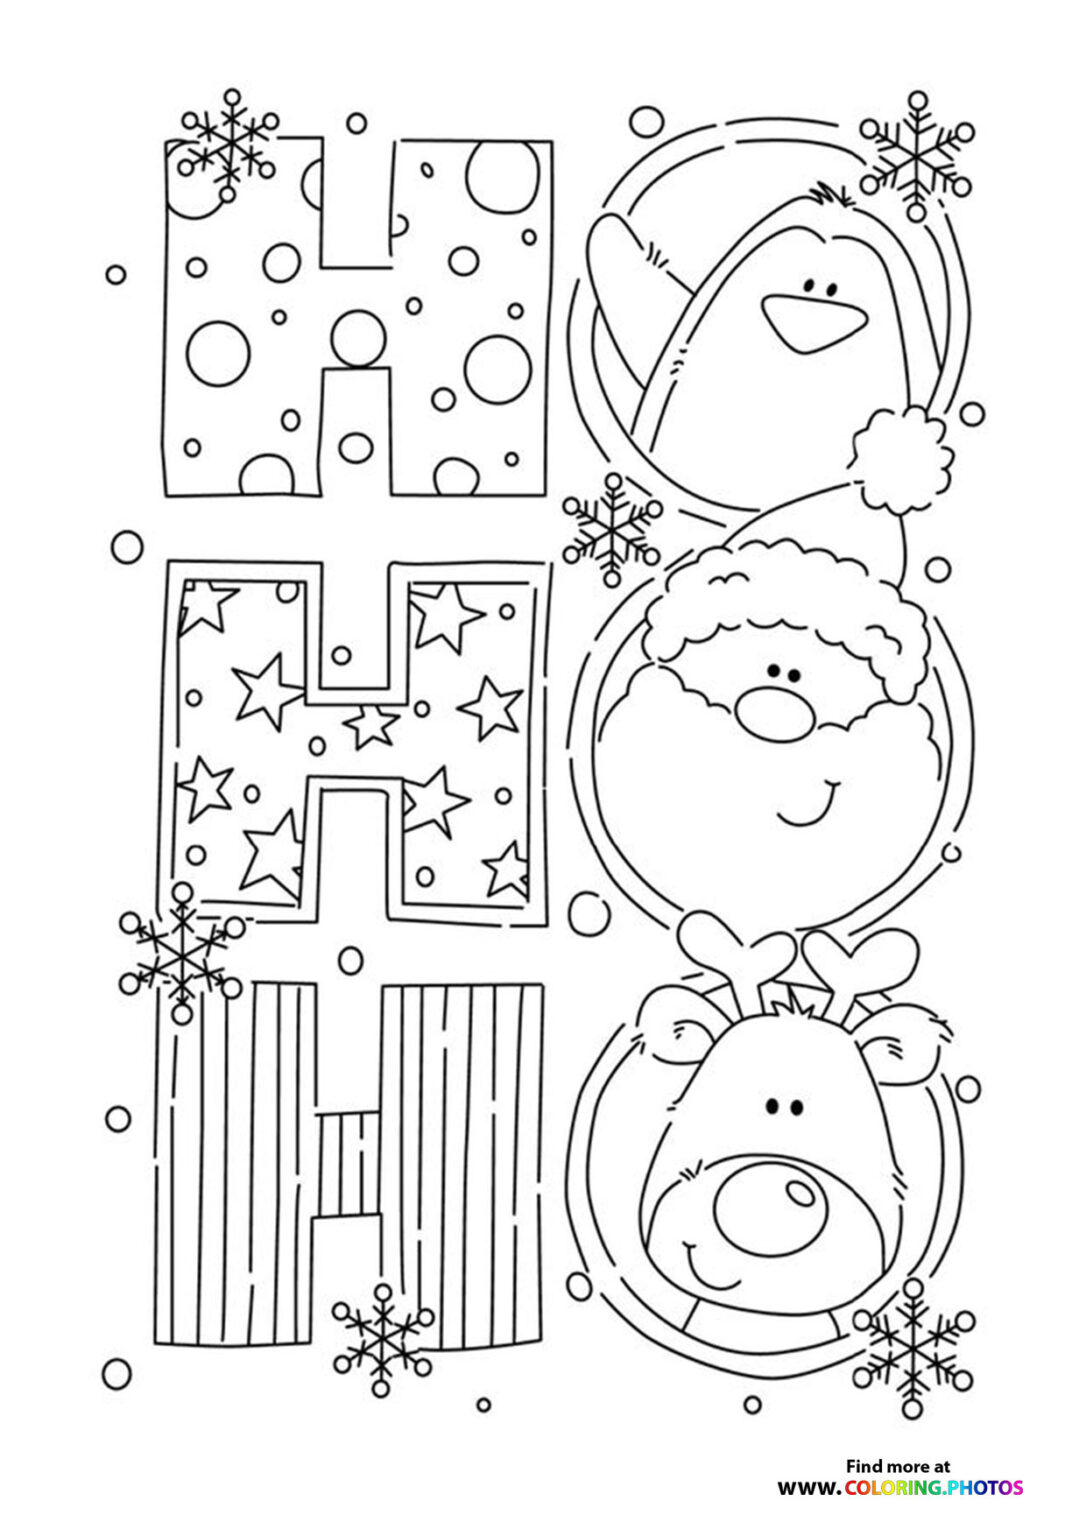 Bluey On Christmas Day - Coloring Pages For Kids